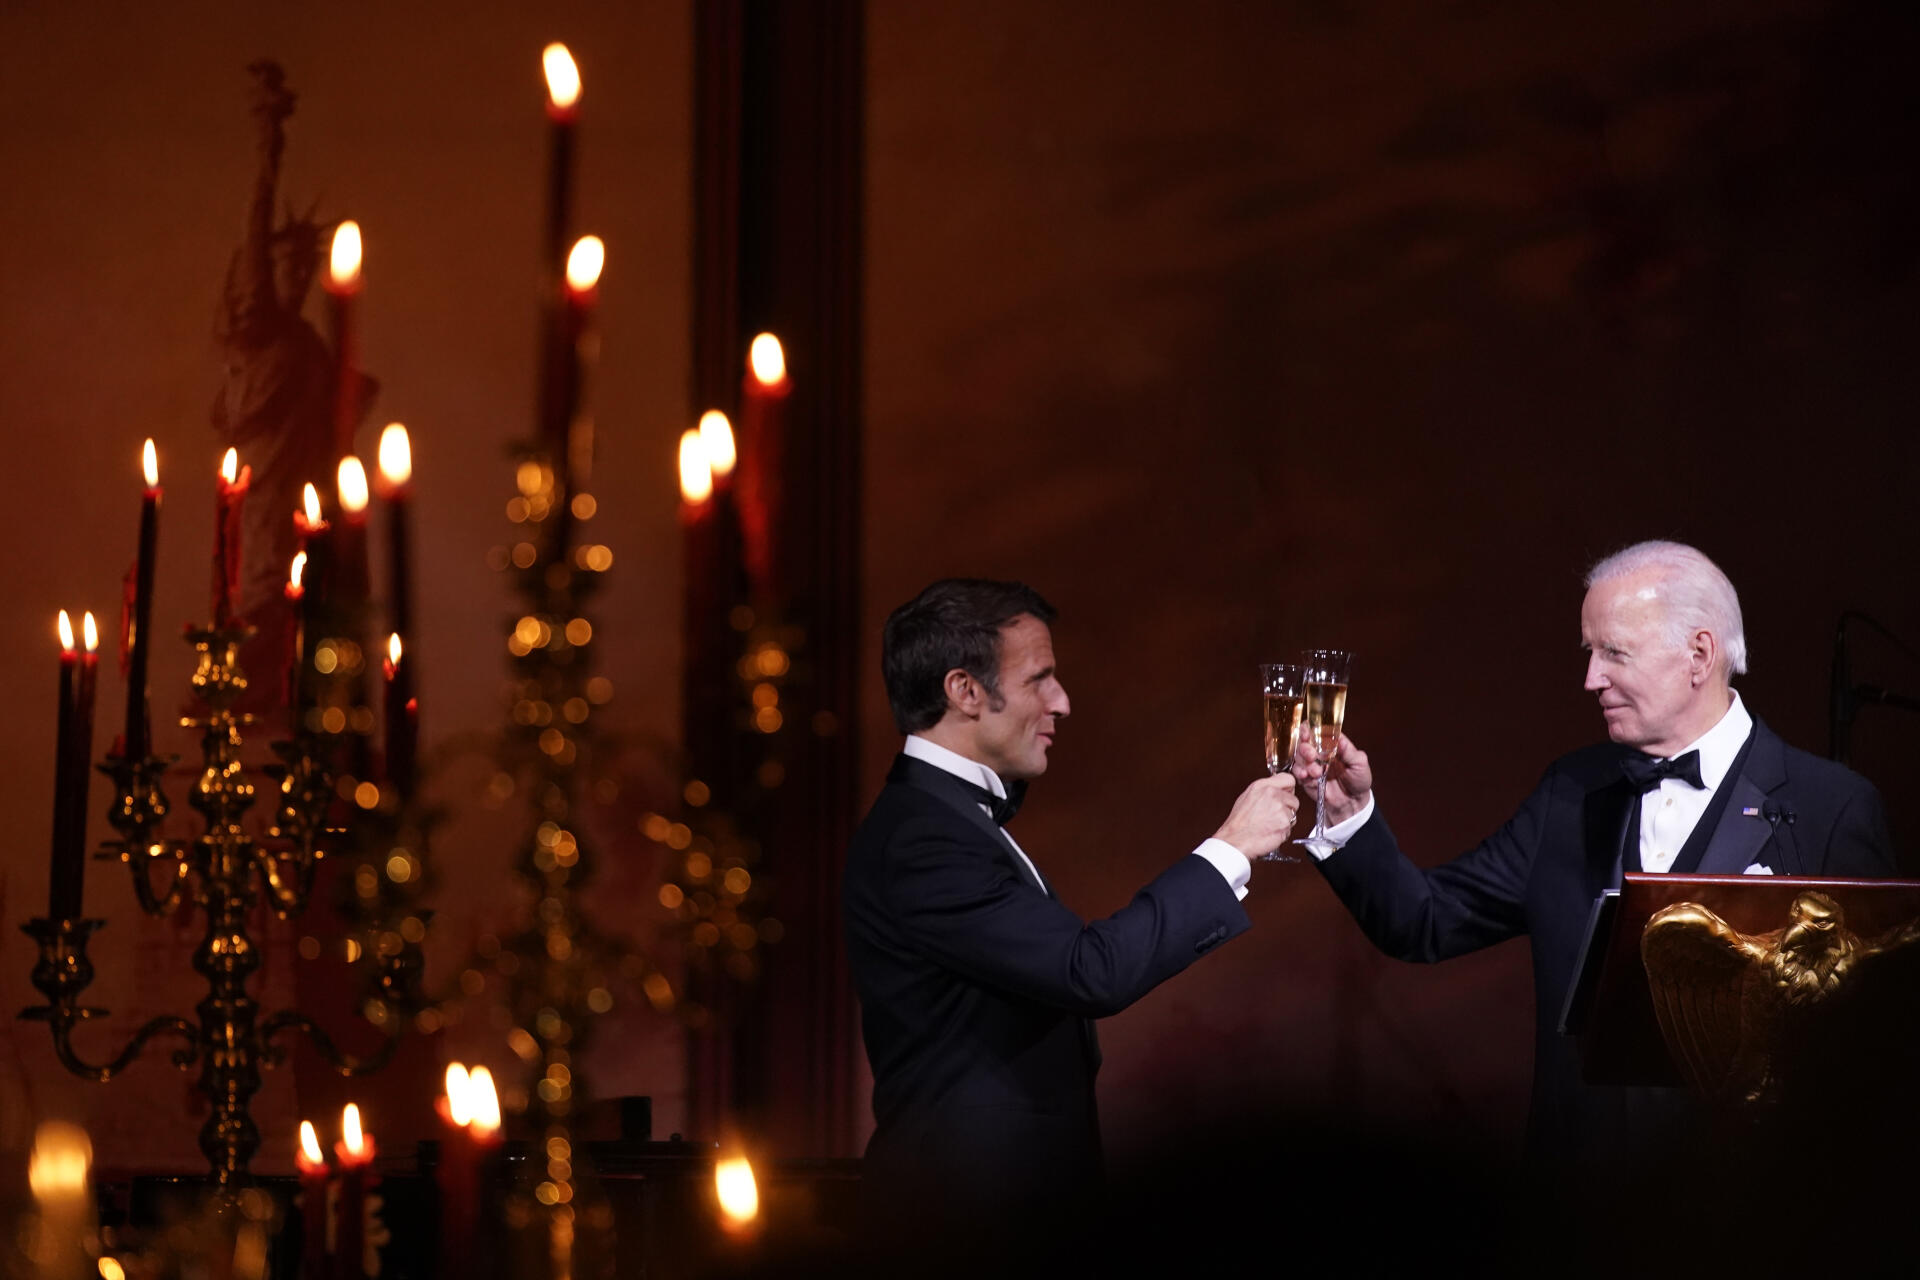 President Joe Biden and French President Emmanuel Macron toast during a State Dinner on the South Lawn of the White House on Thursday.